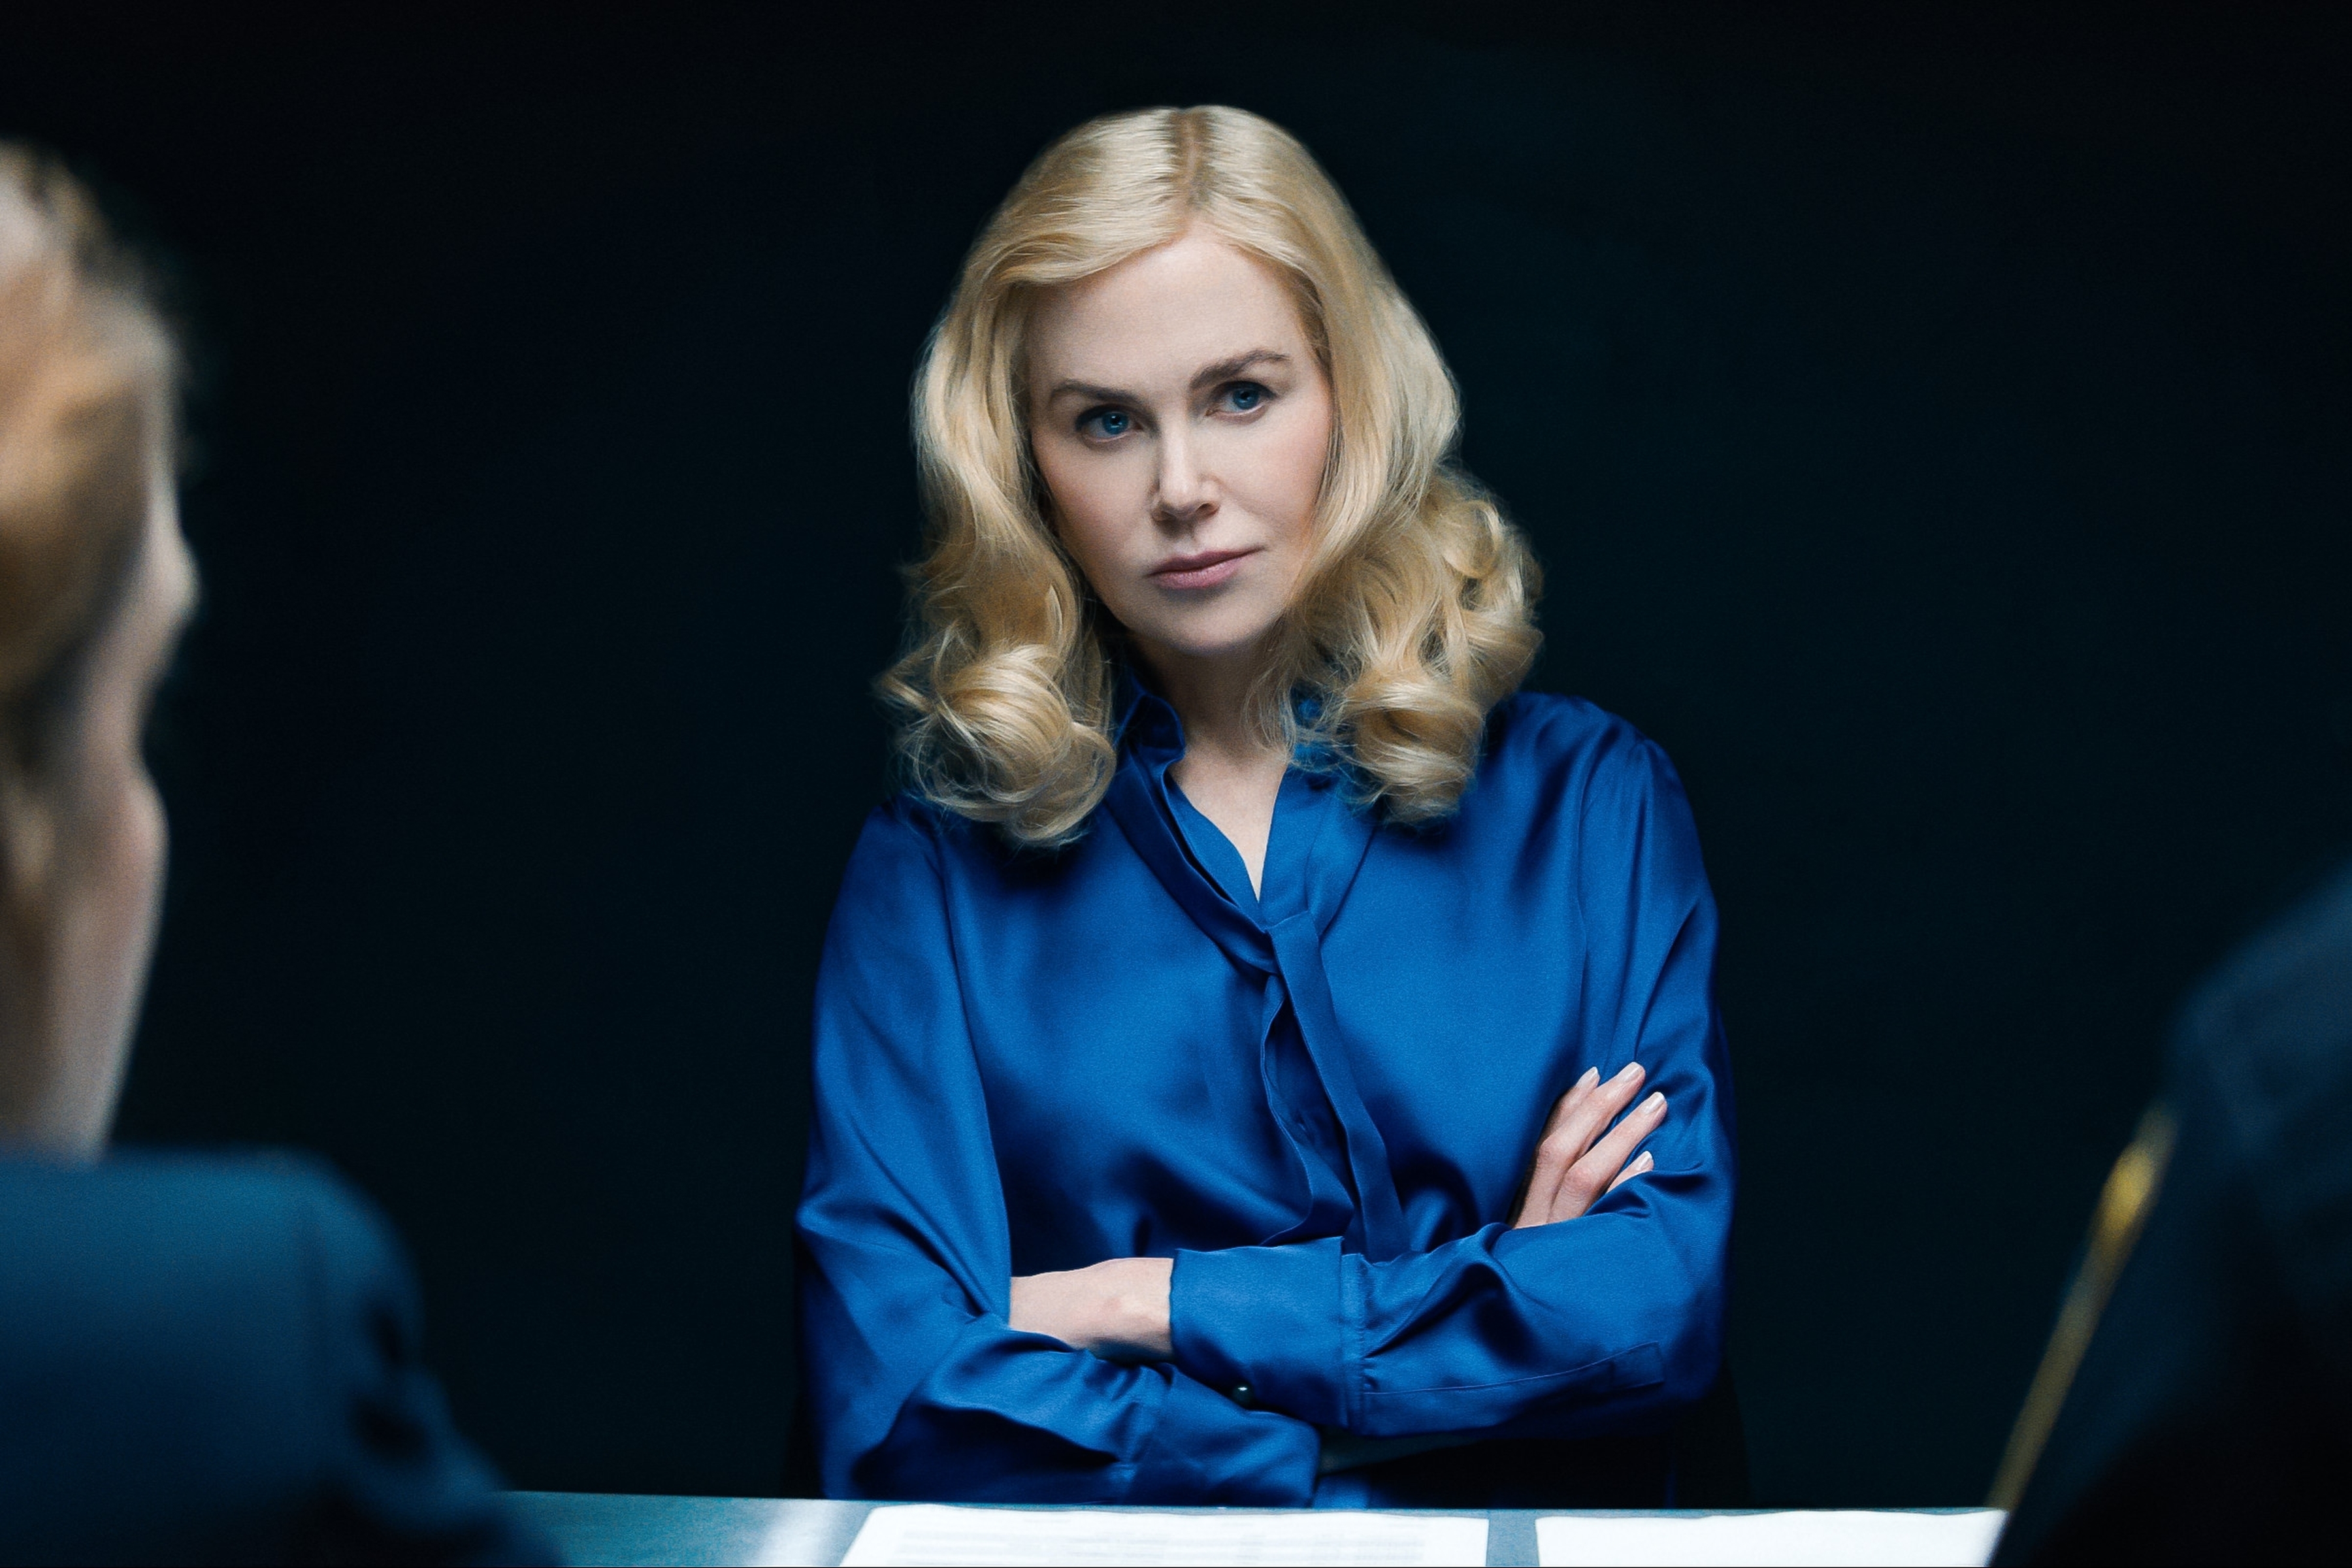 Nicole Kidman seated with arms crossed, wearing a satin blouse, facing two people at a table in a dimly lit room